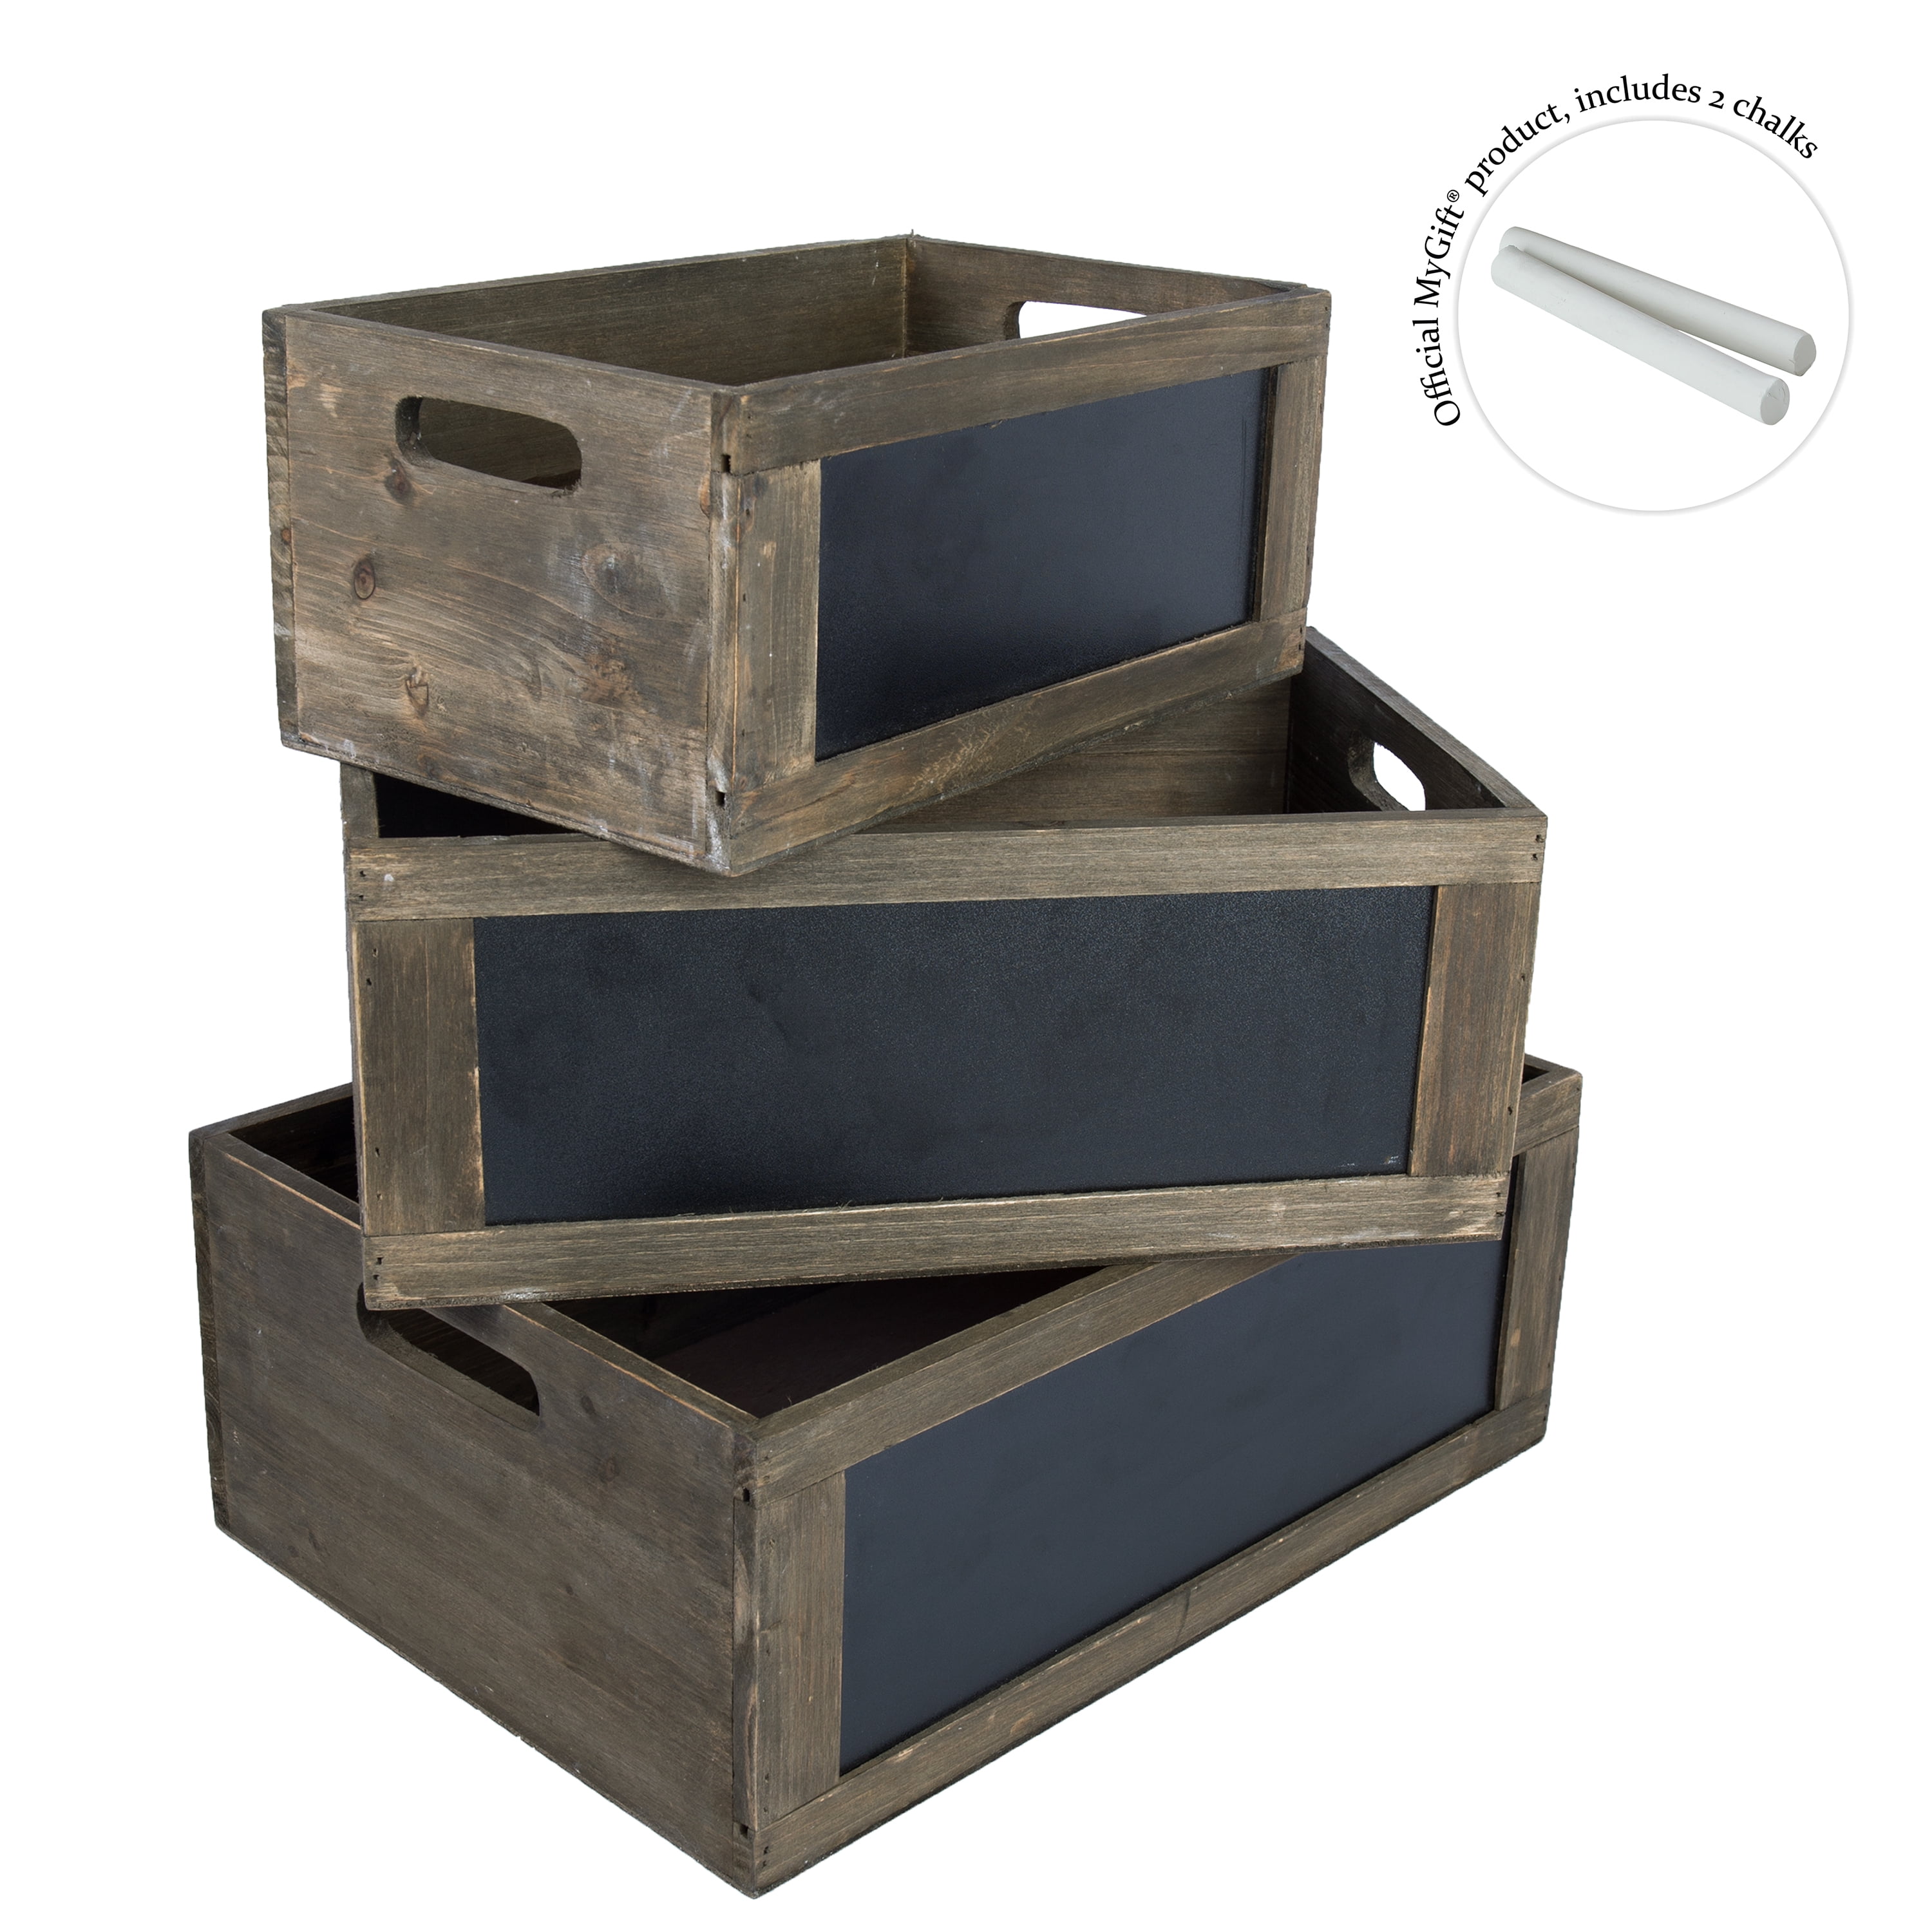 MyGift Rustic Grey Wood Storage Crates with Chalkboard Labels & Handles Set of 2 